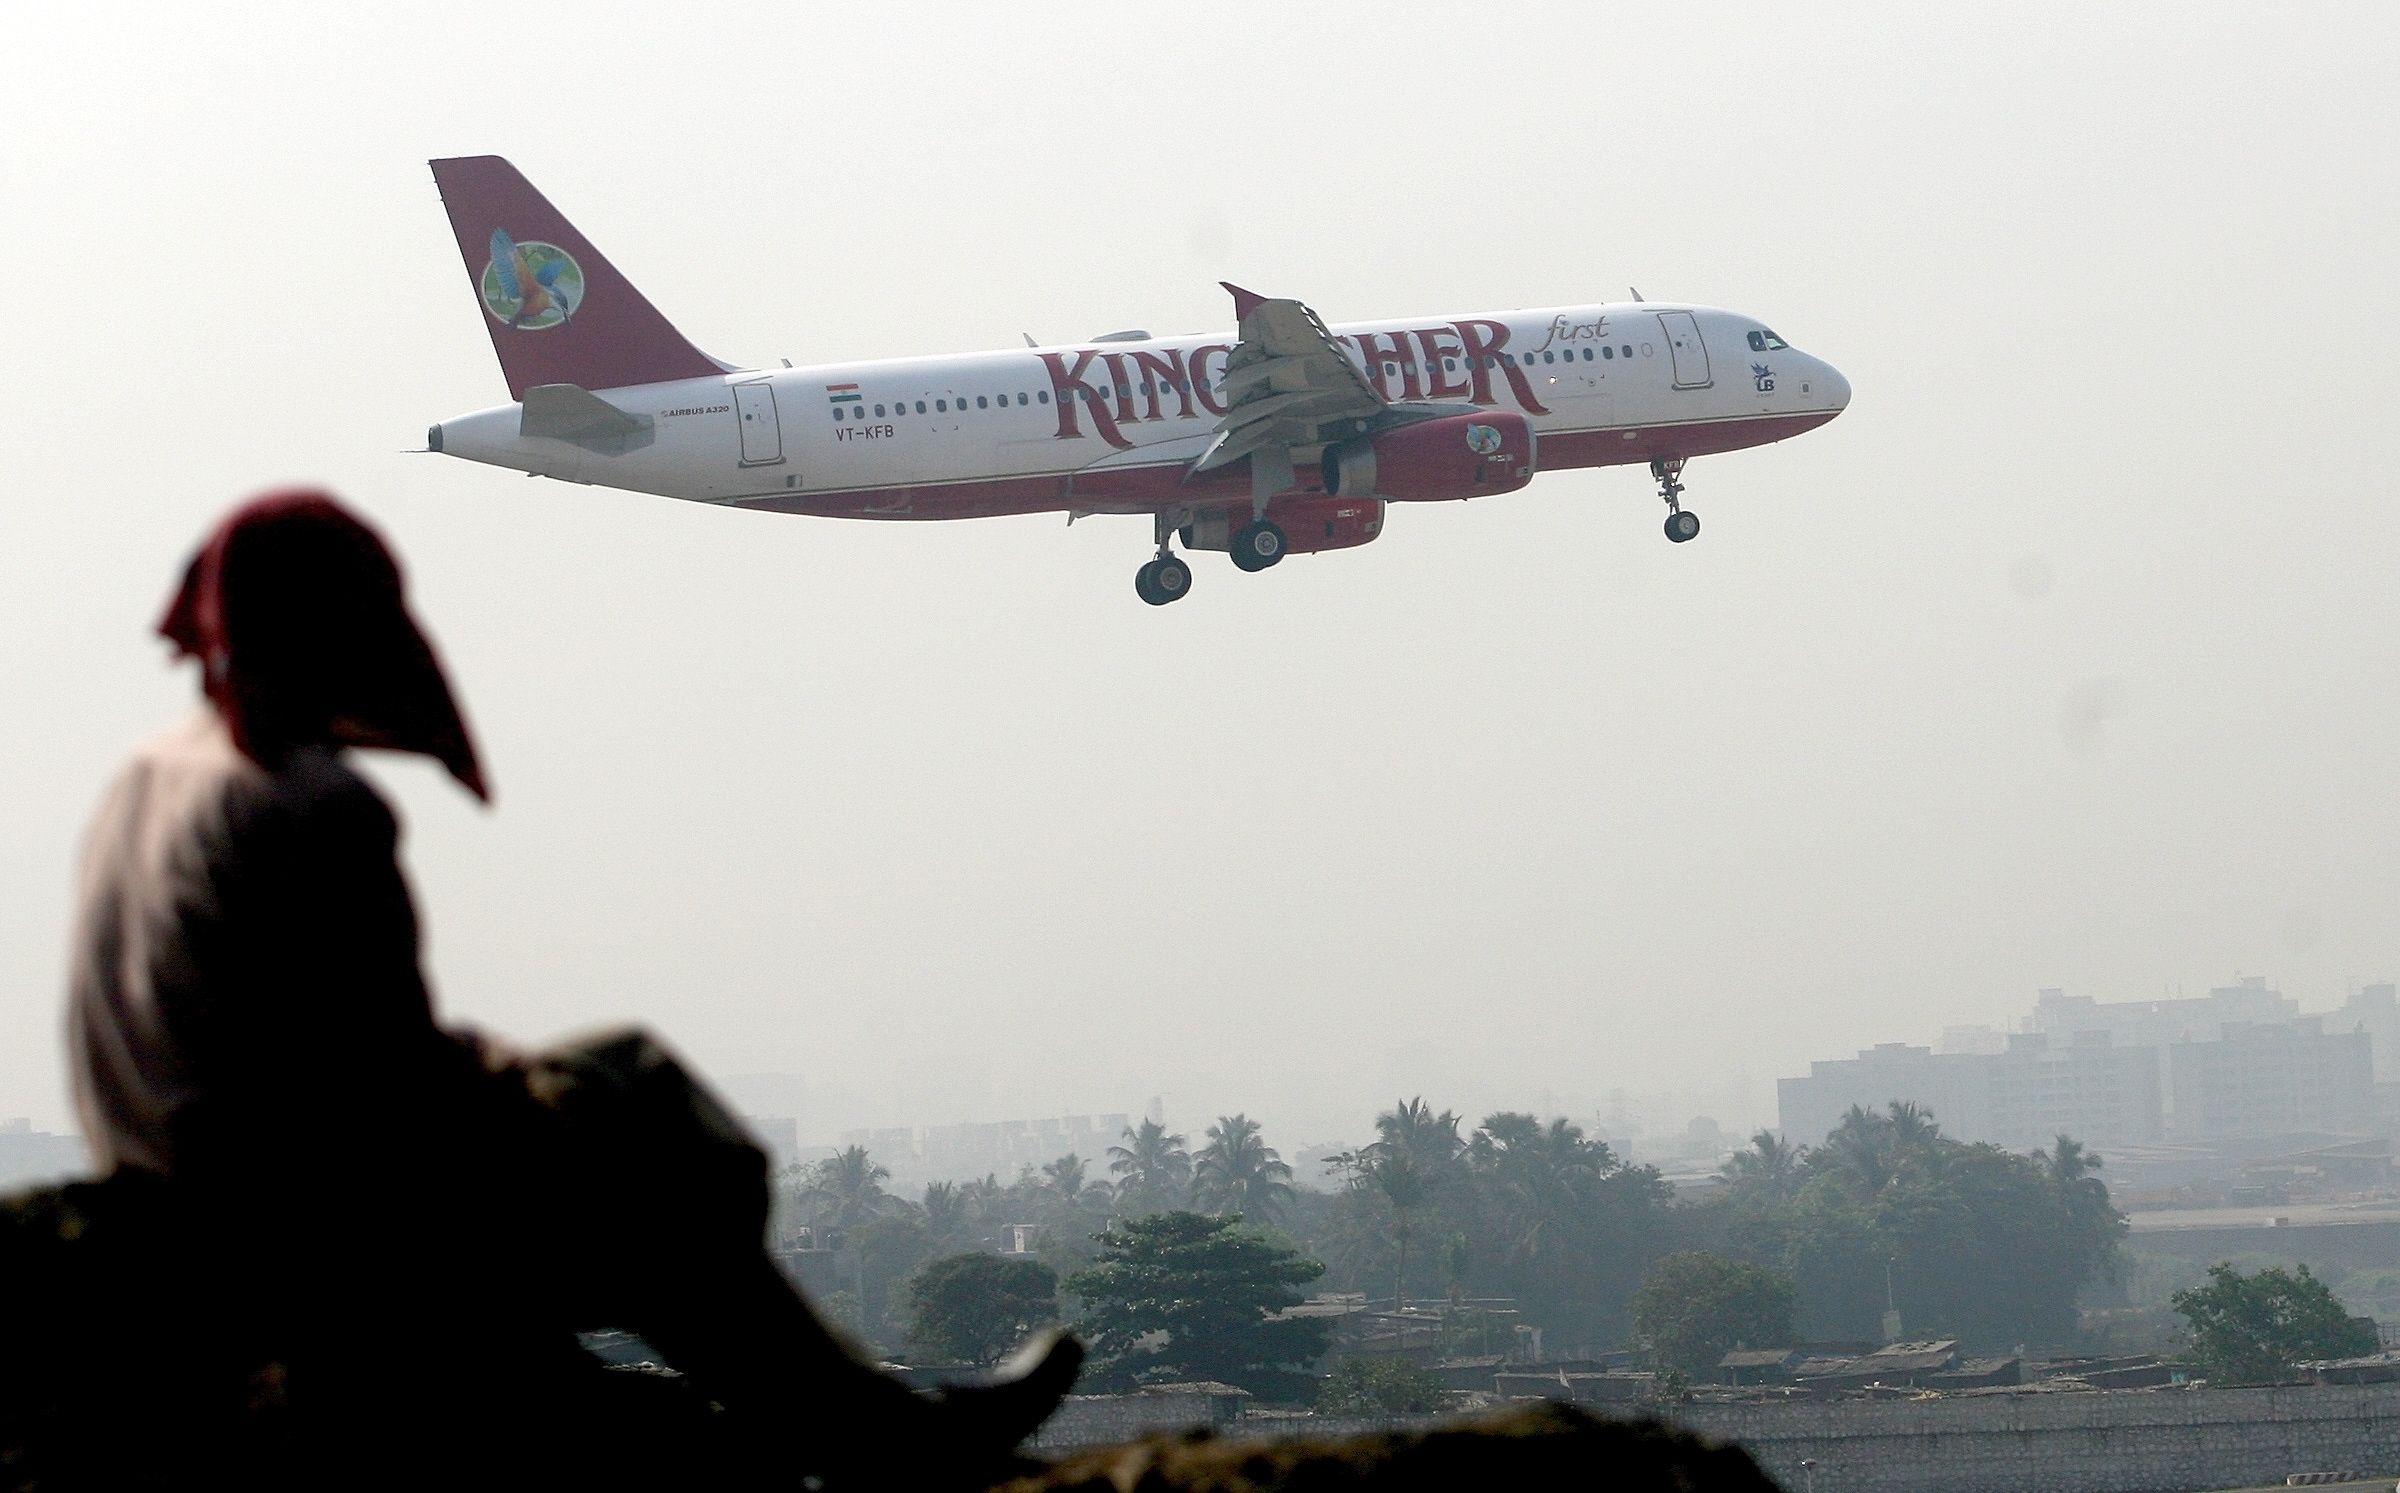 Kingfisher Airlines Airbus A320